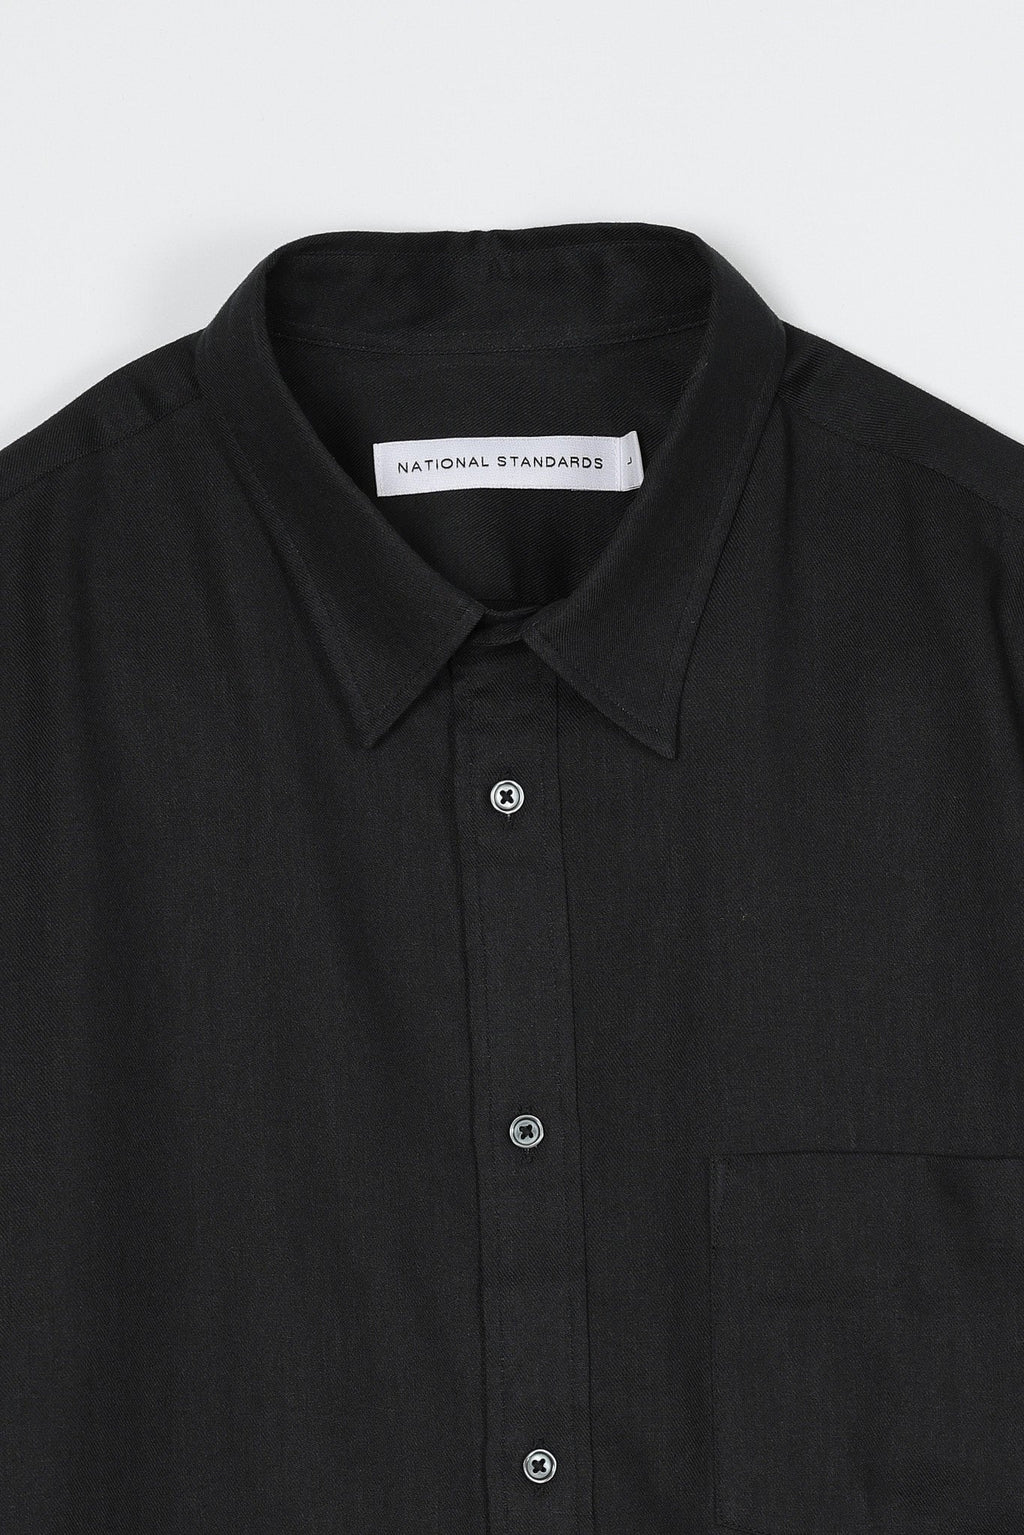 Japanese Dyed Twill in Black 06